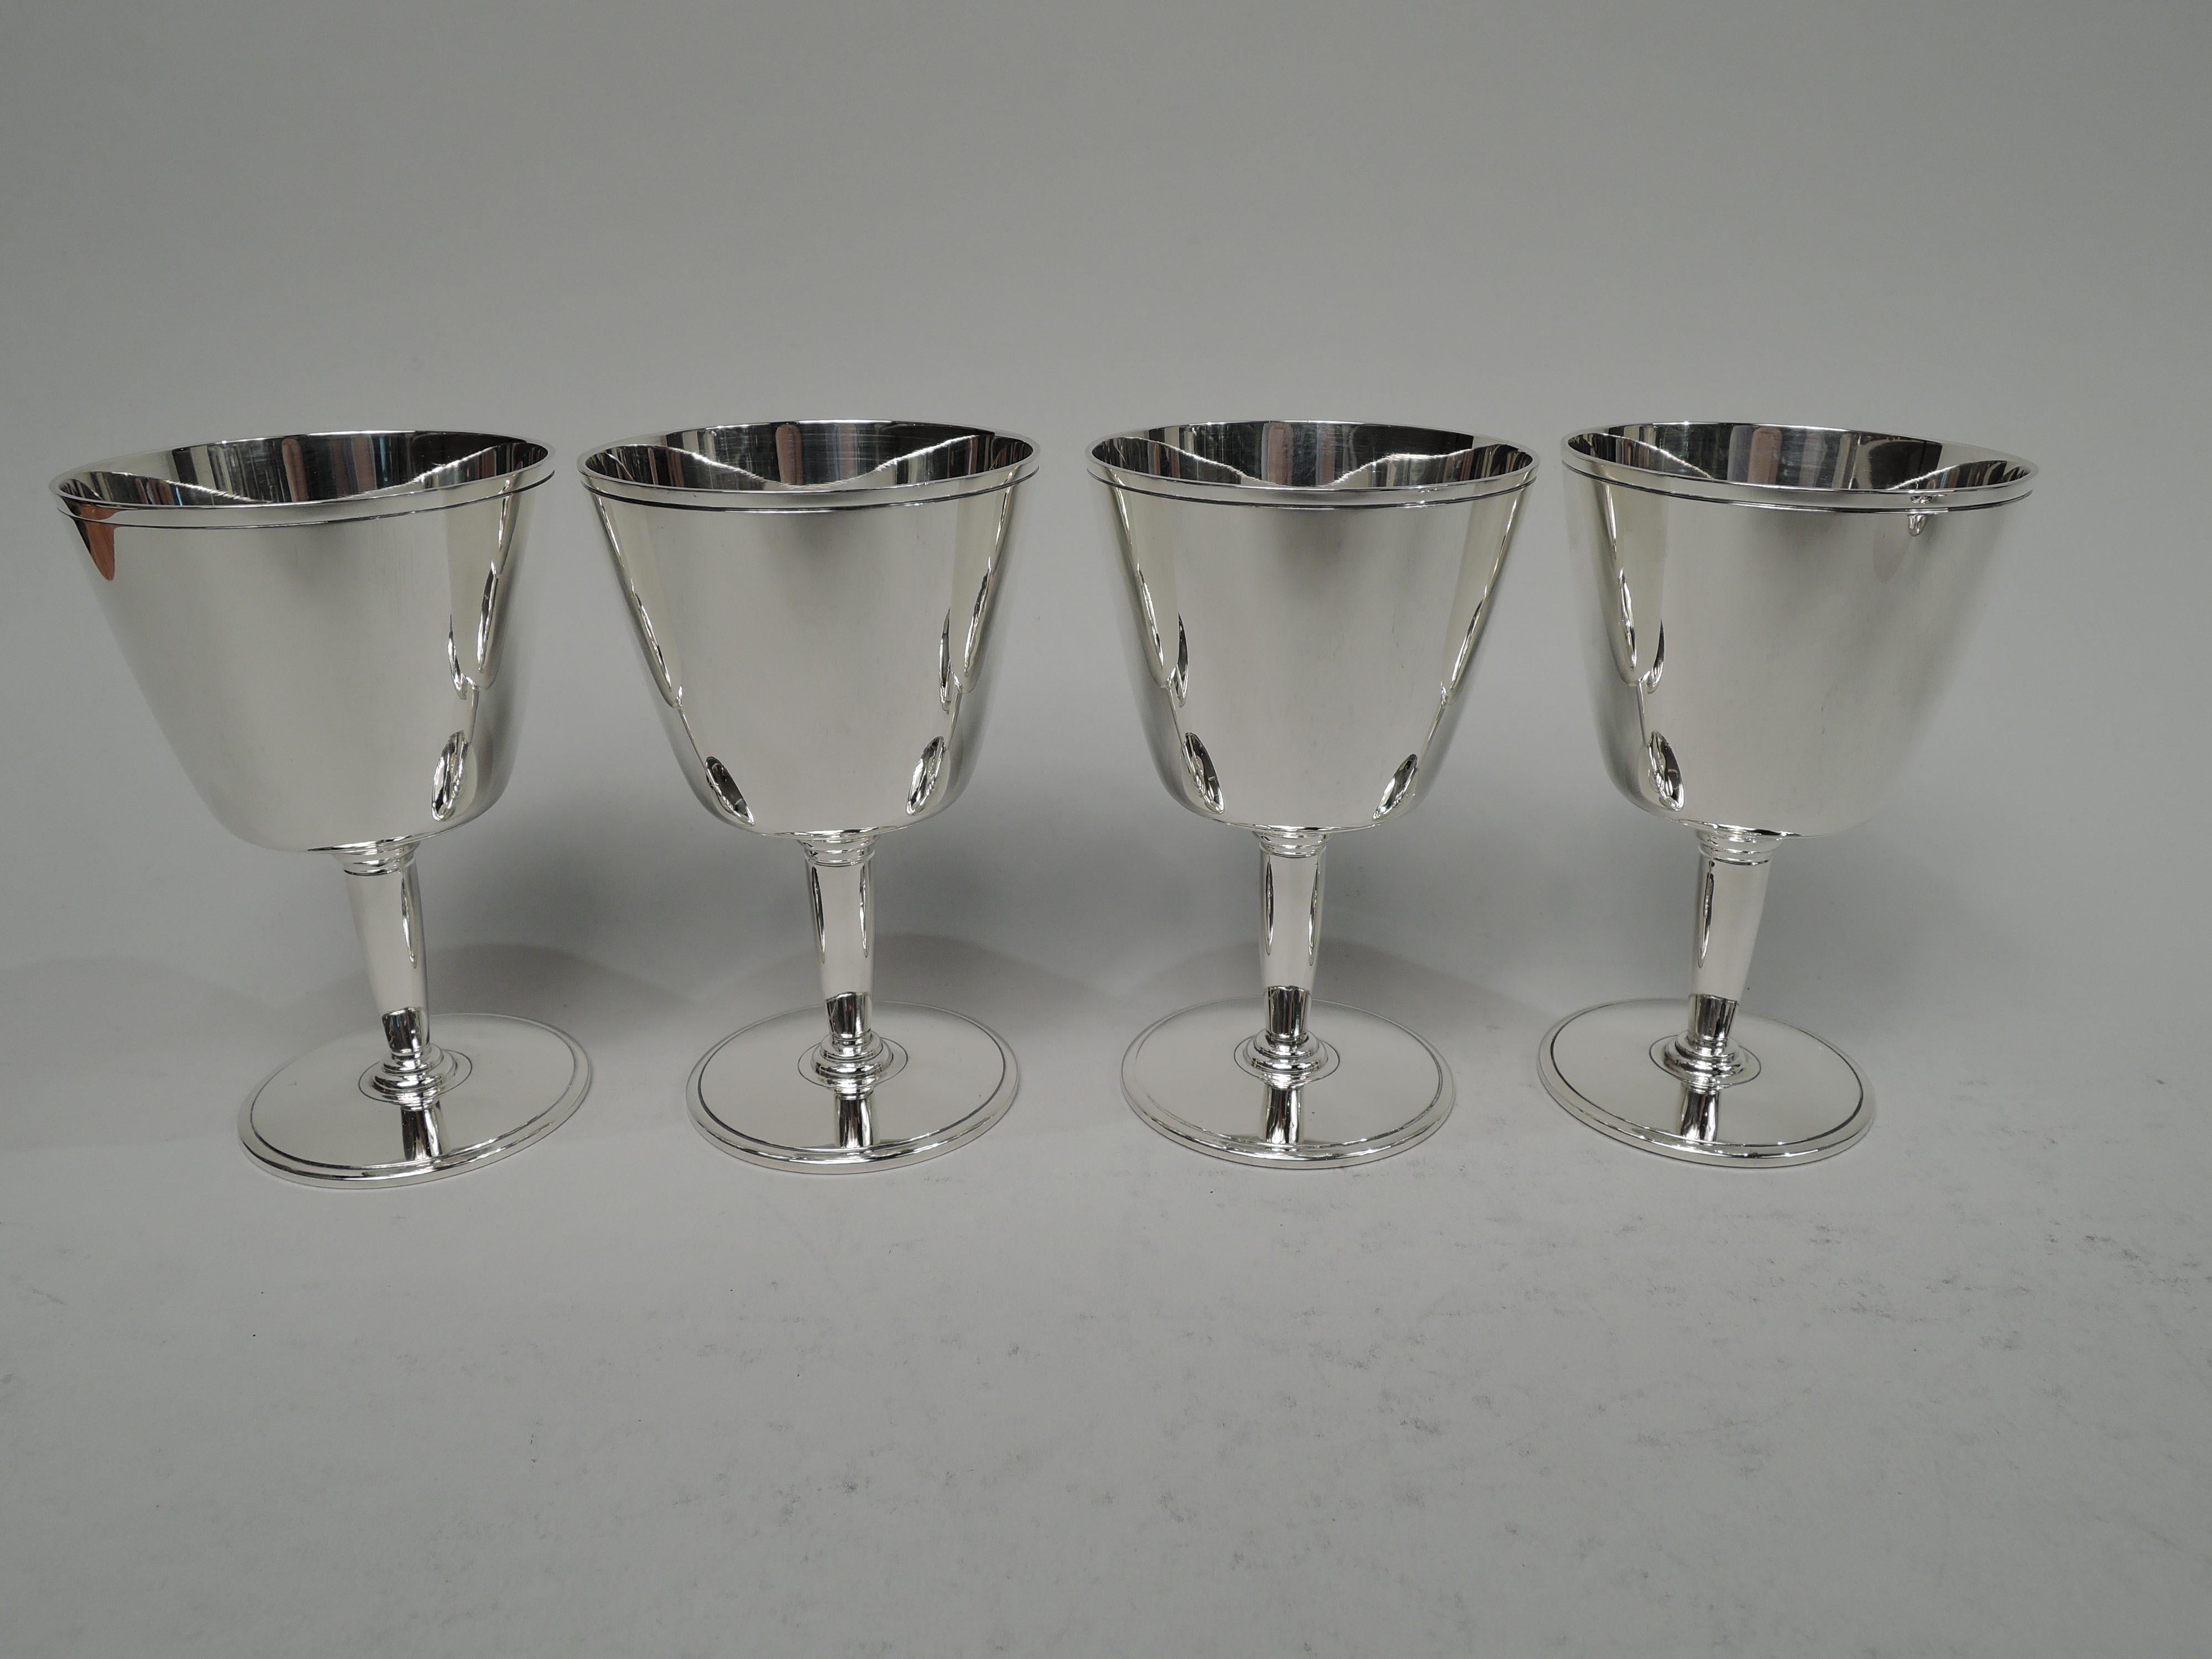 Set of 8 Art Deco sterling silver cocktail cups. Made by Tiffany & Co. in New York, ca 1929. Each: Tapering sides and flat bottom mounted to tapering stem on flat circular foot. Incised bands on rims and bowl underside. Spare and functional. Nice